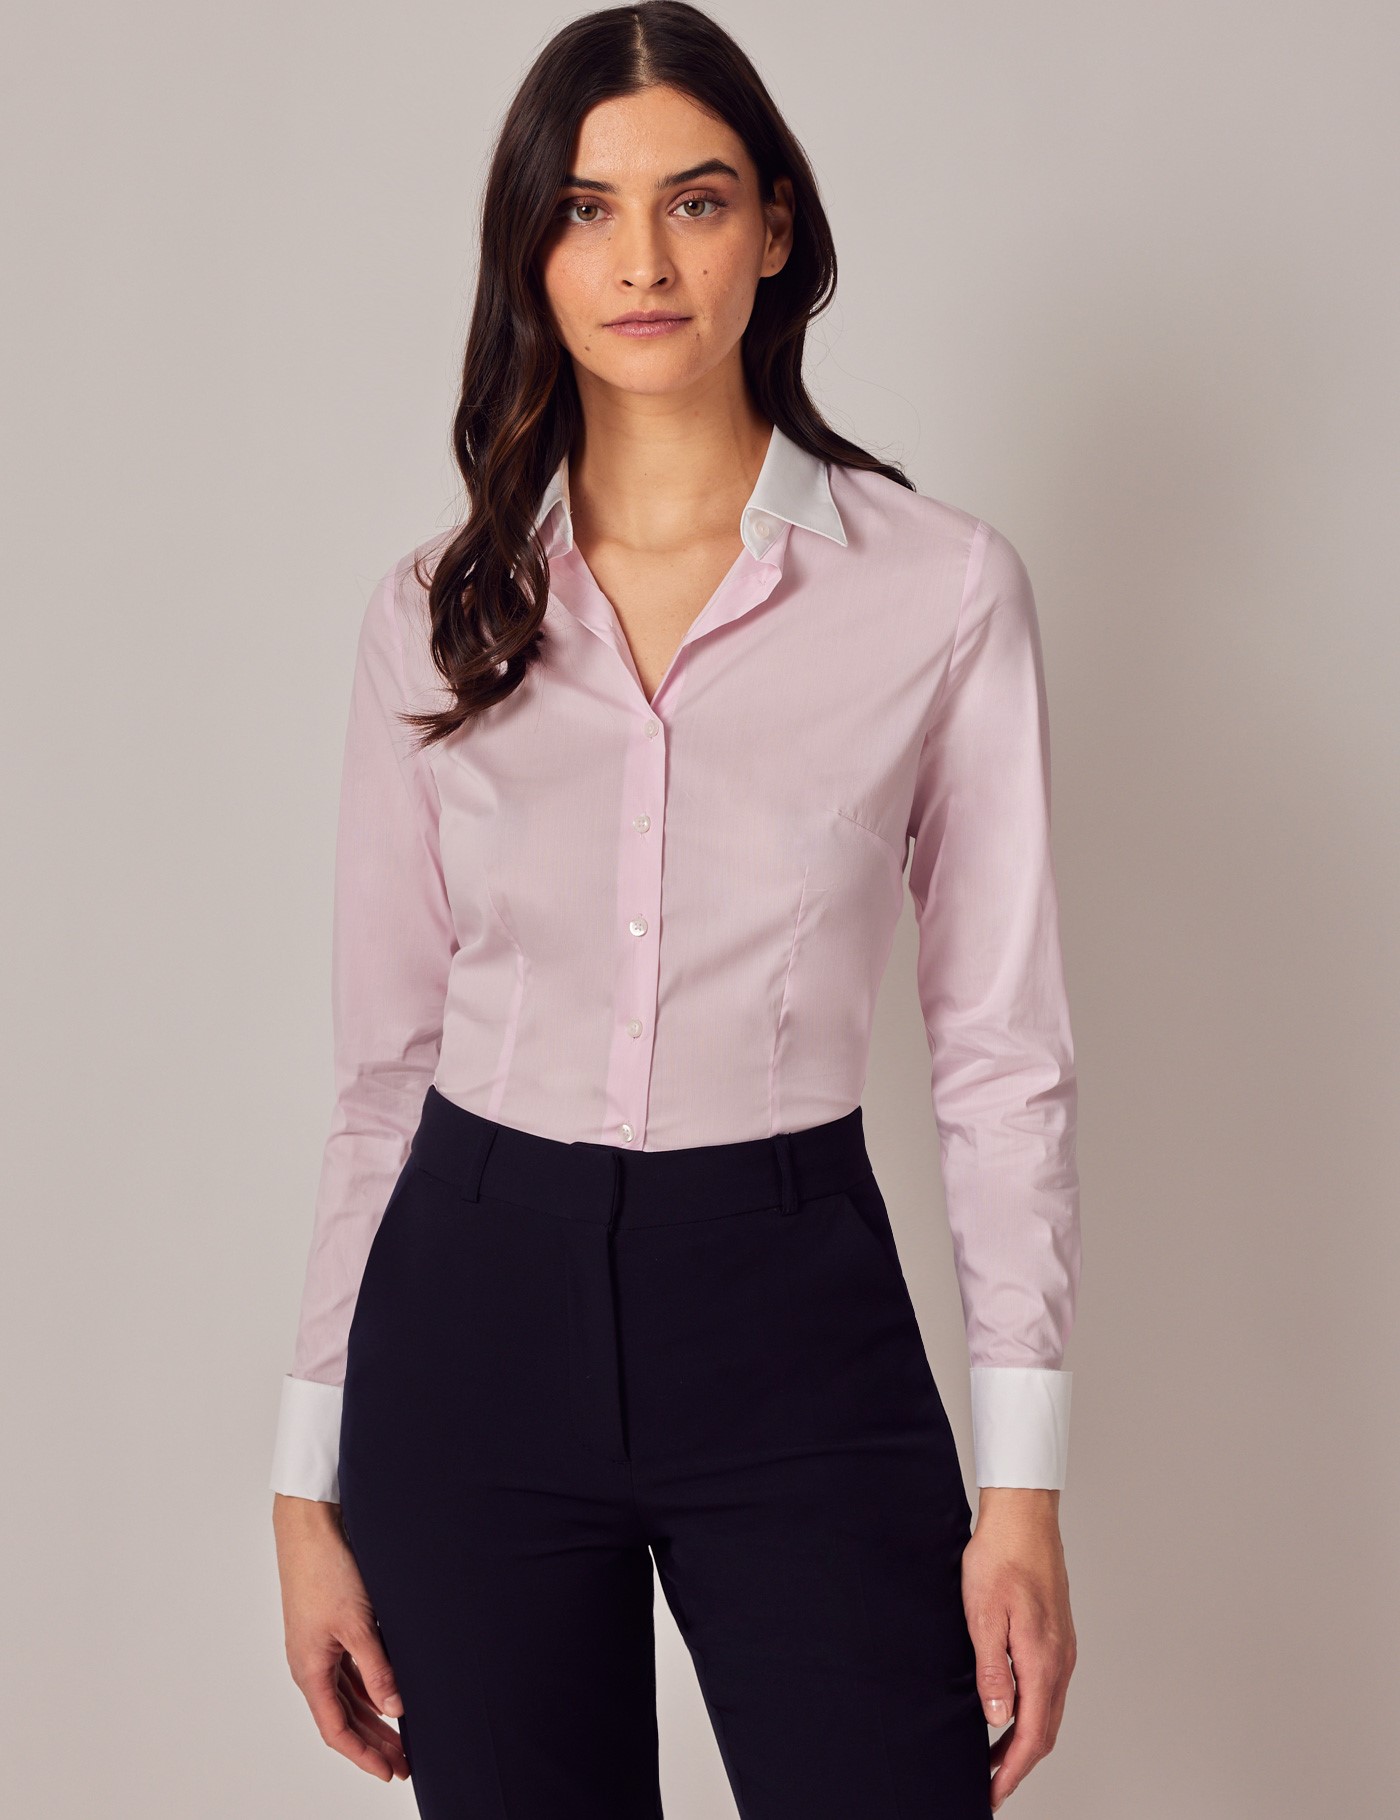 Women's Light Fitted Nylon Shirt With White Collar & Double | Hawes & Curtis